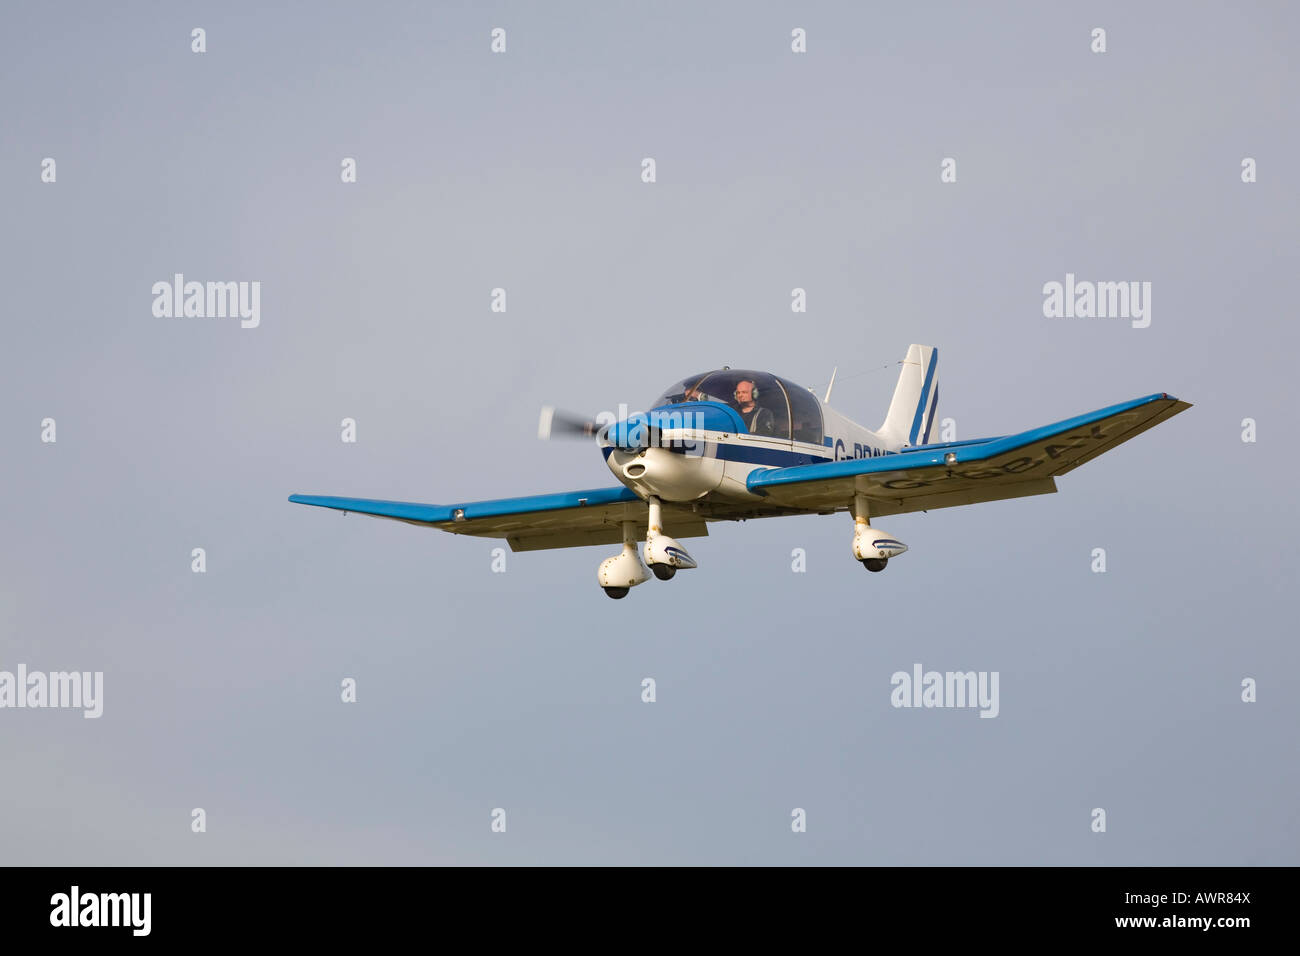 Avions Peirre CEA DR400-140 Major G-BBAY in flight on final approach to land Stock Photo